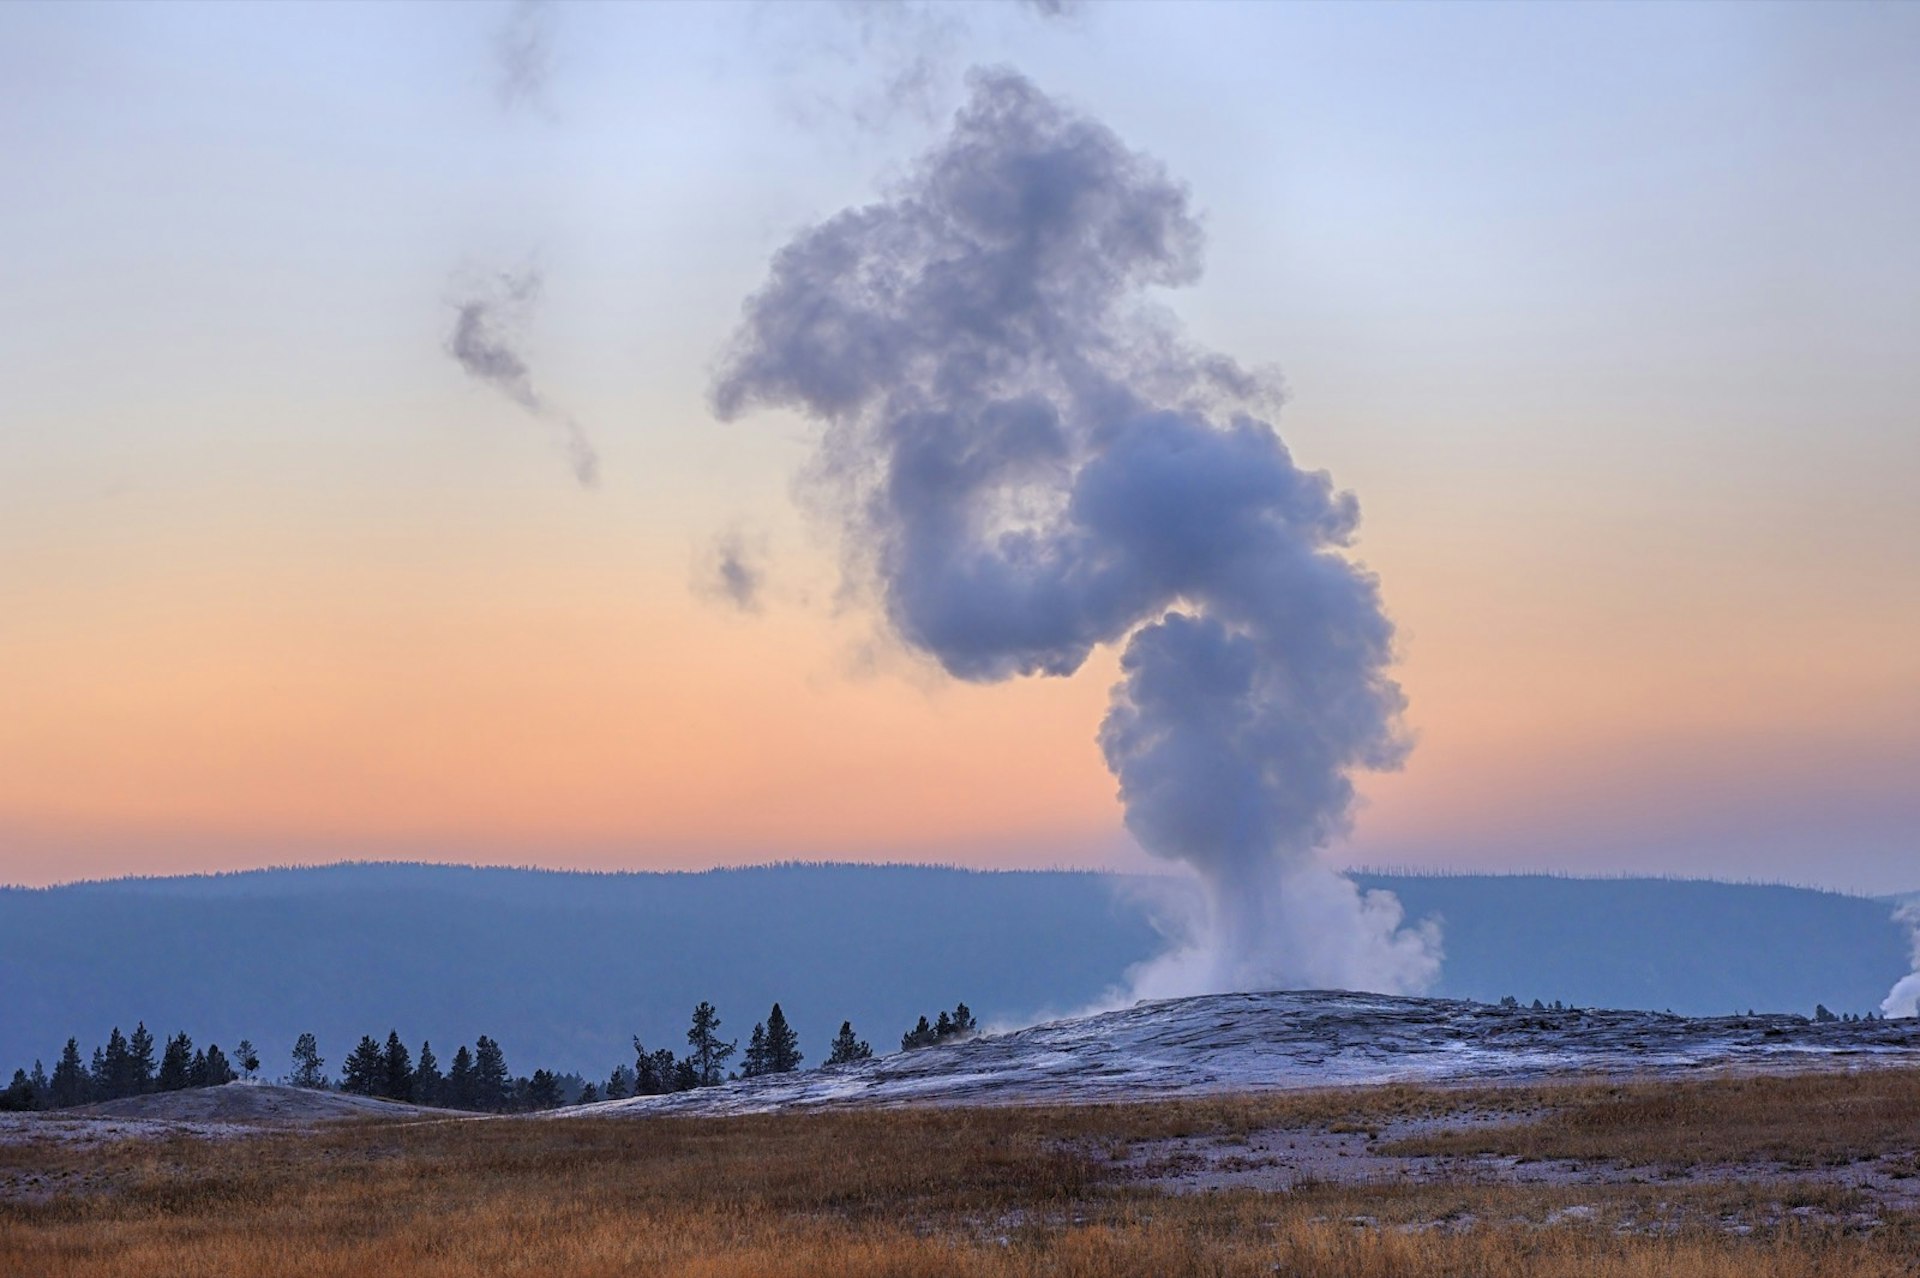 The Old Faithful Geyser at Yellowstone National Park erupts at sunset in Wyoming. It's one of several supersized natural wonders in the US National Parks system